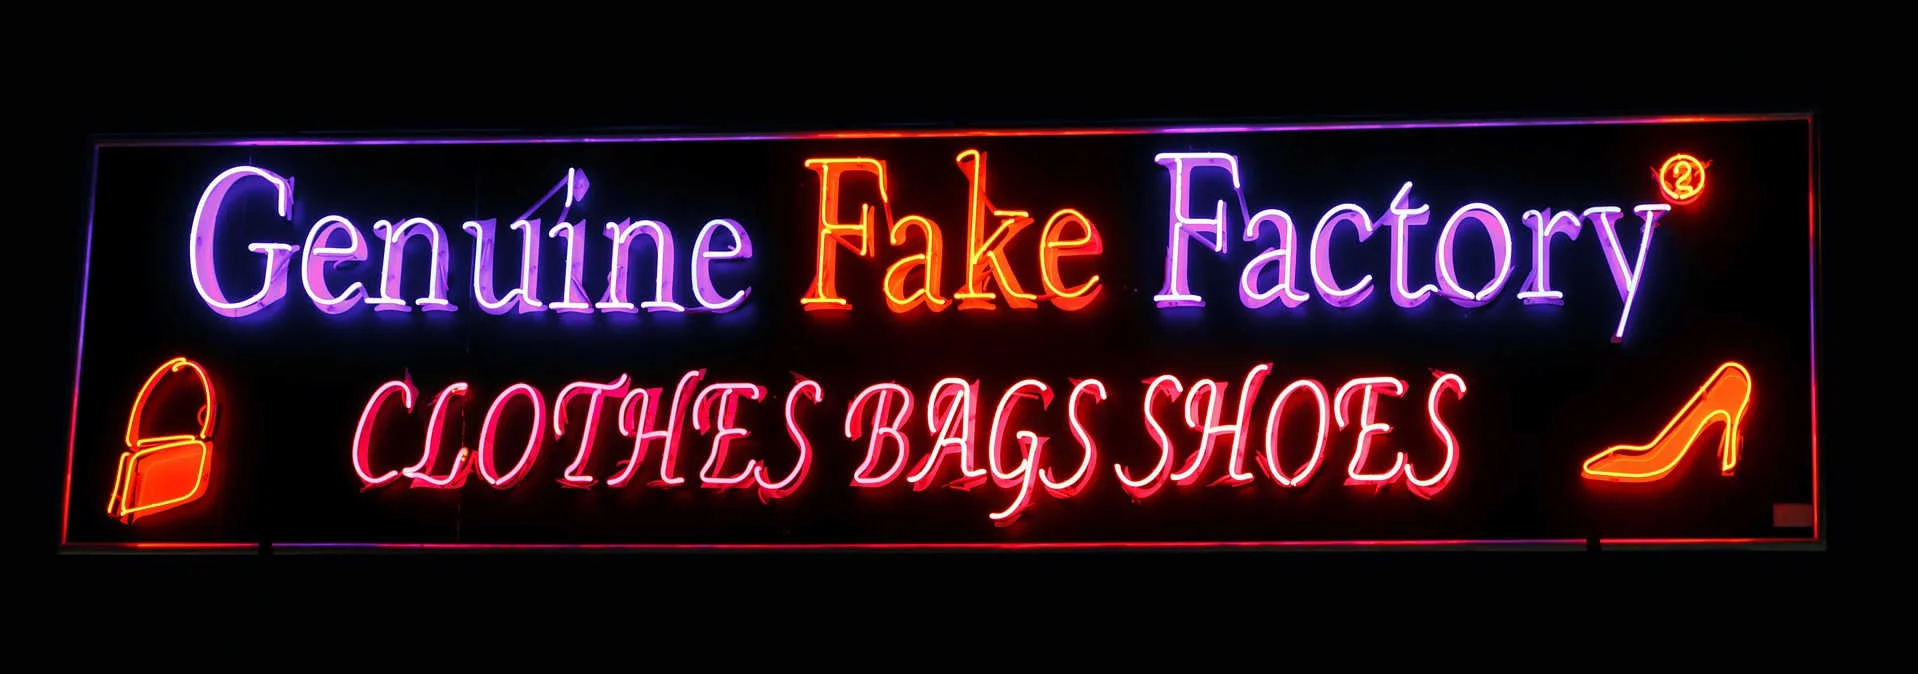 A neon sign advertising fake items, representing the influence of using fake items on unethical behavior.